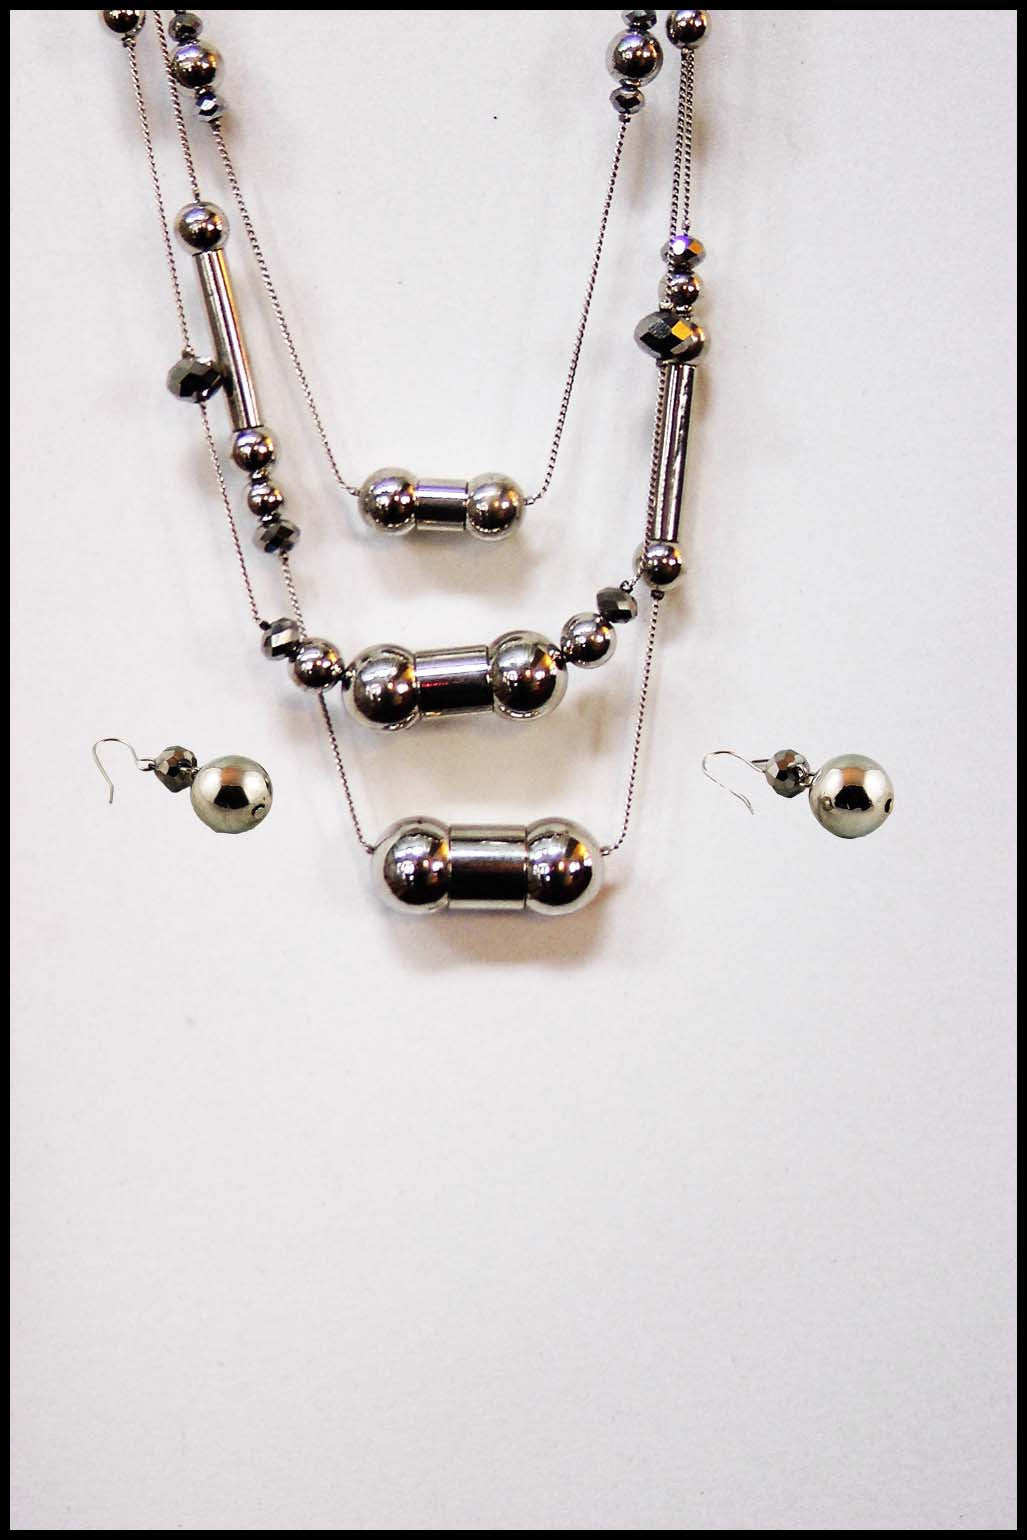 Beads and Tubes Necklace and Earring Set